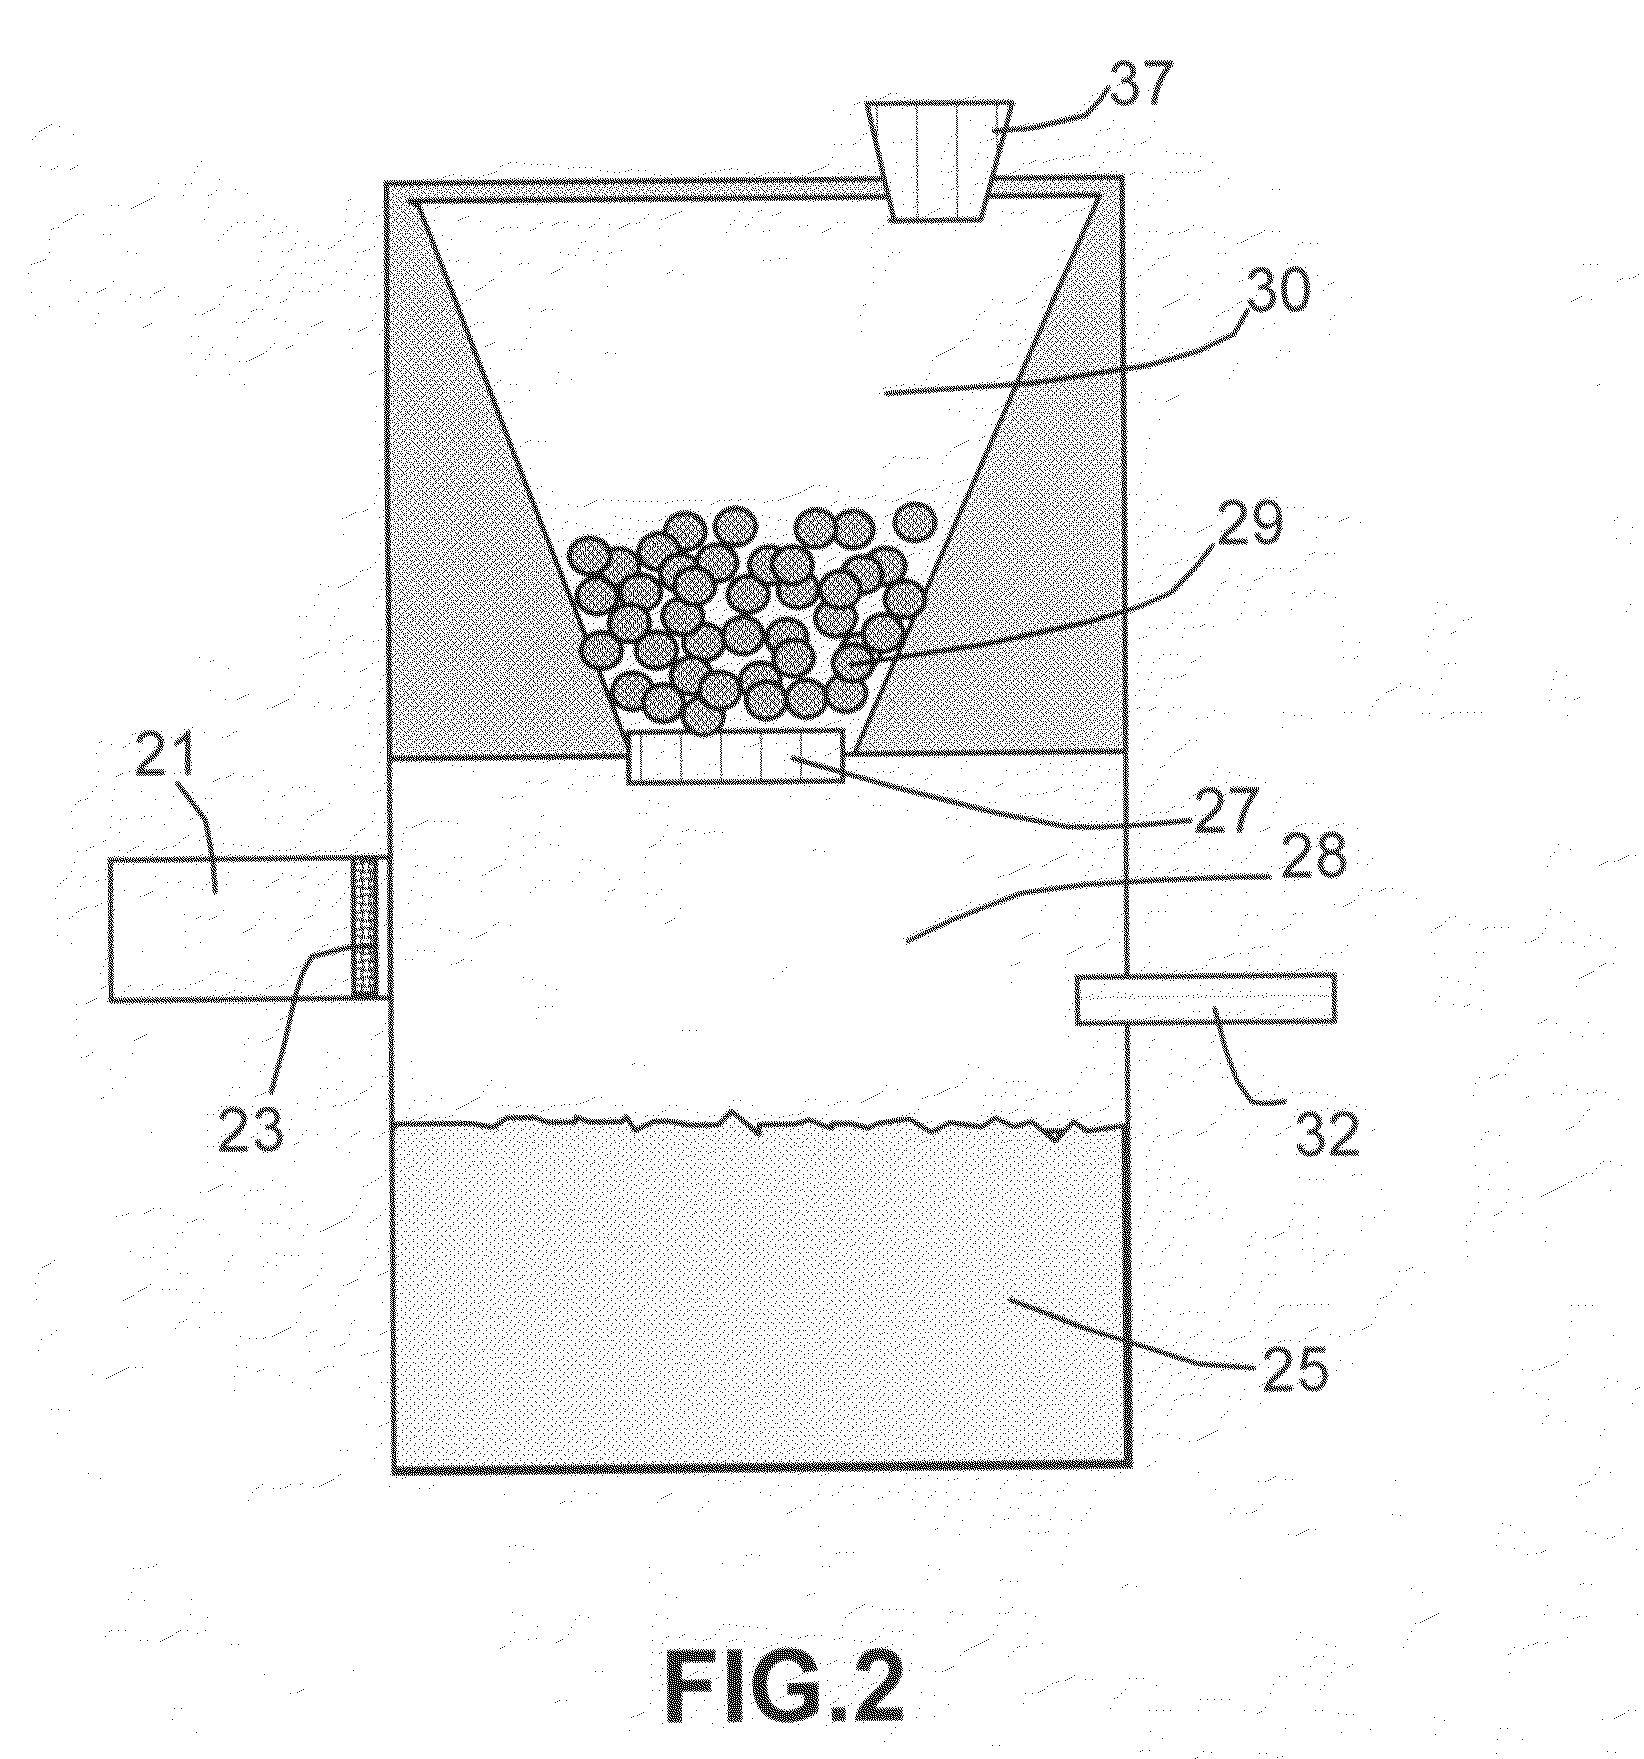 Method of storing and generating hydrogen for fuel cell applications